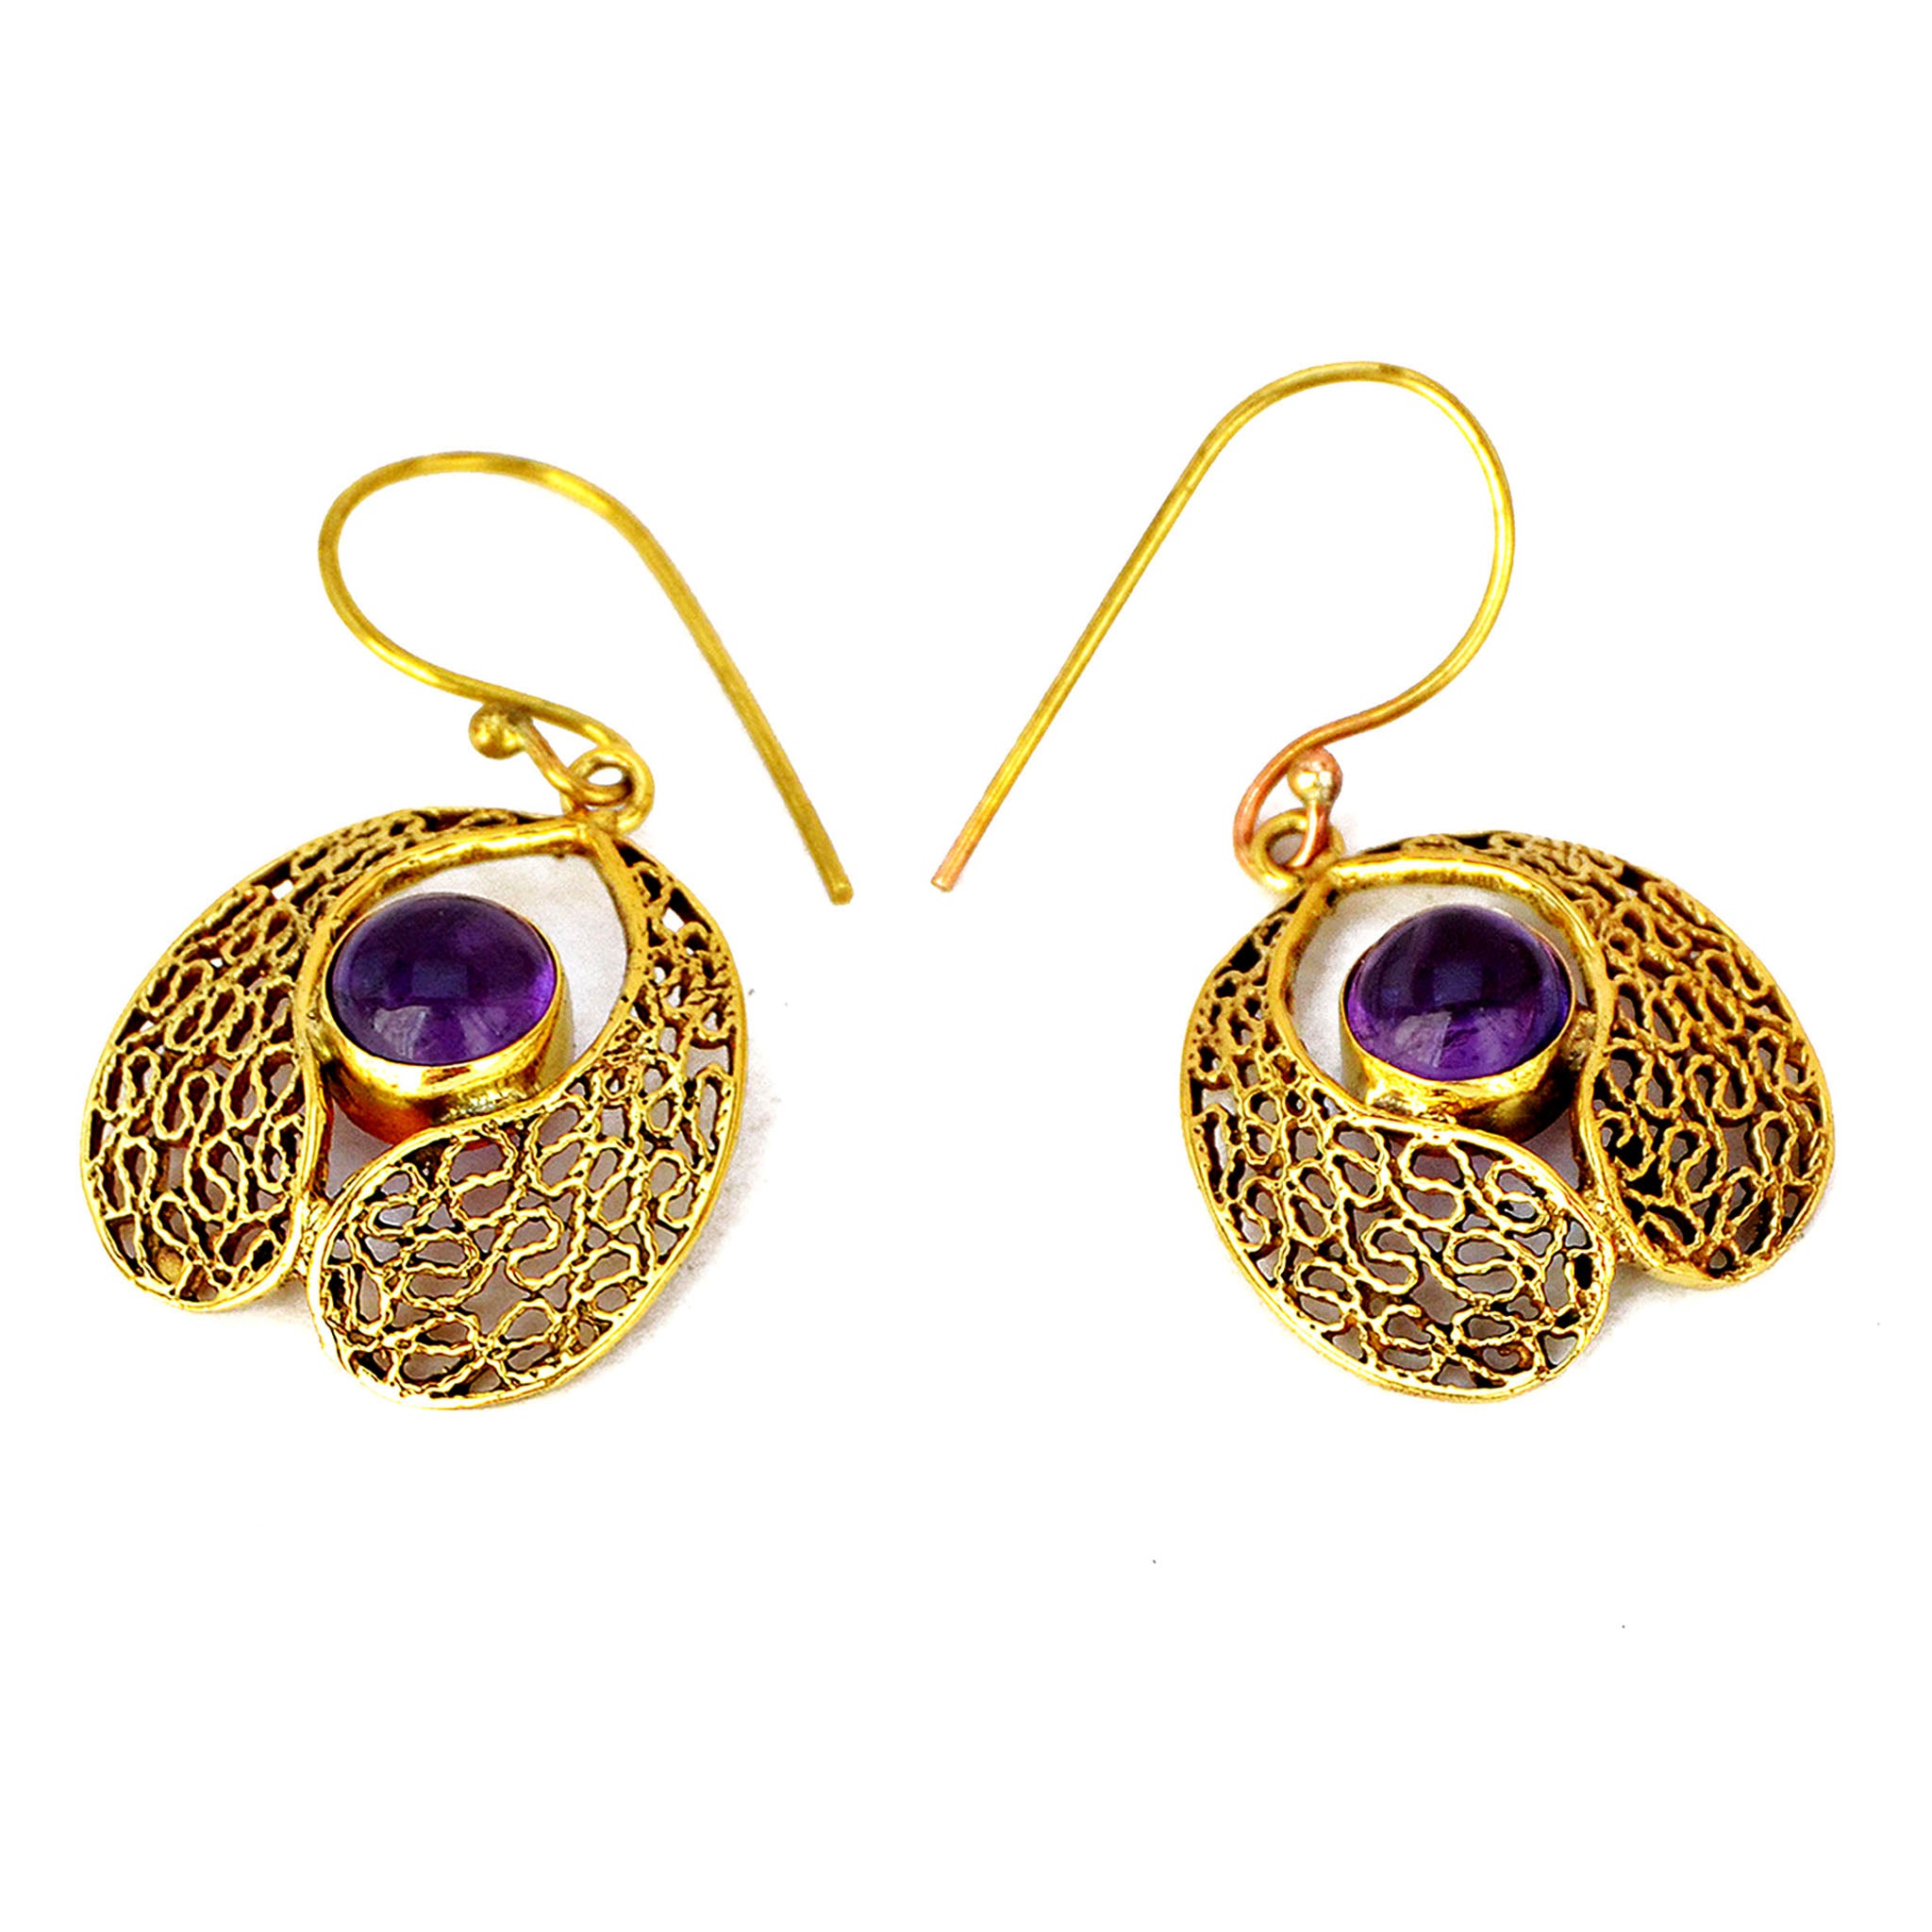 Indian filigree earrings with stones